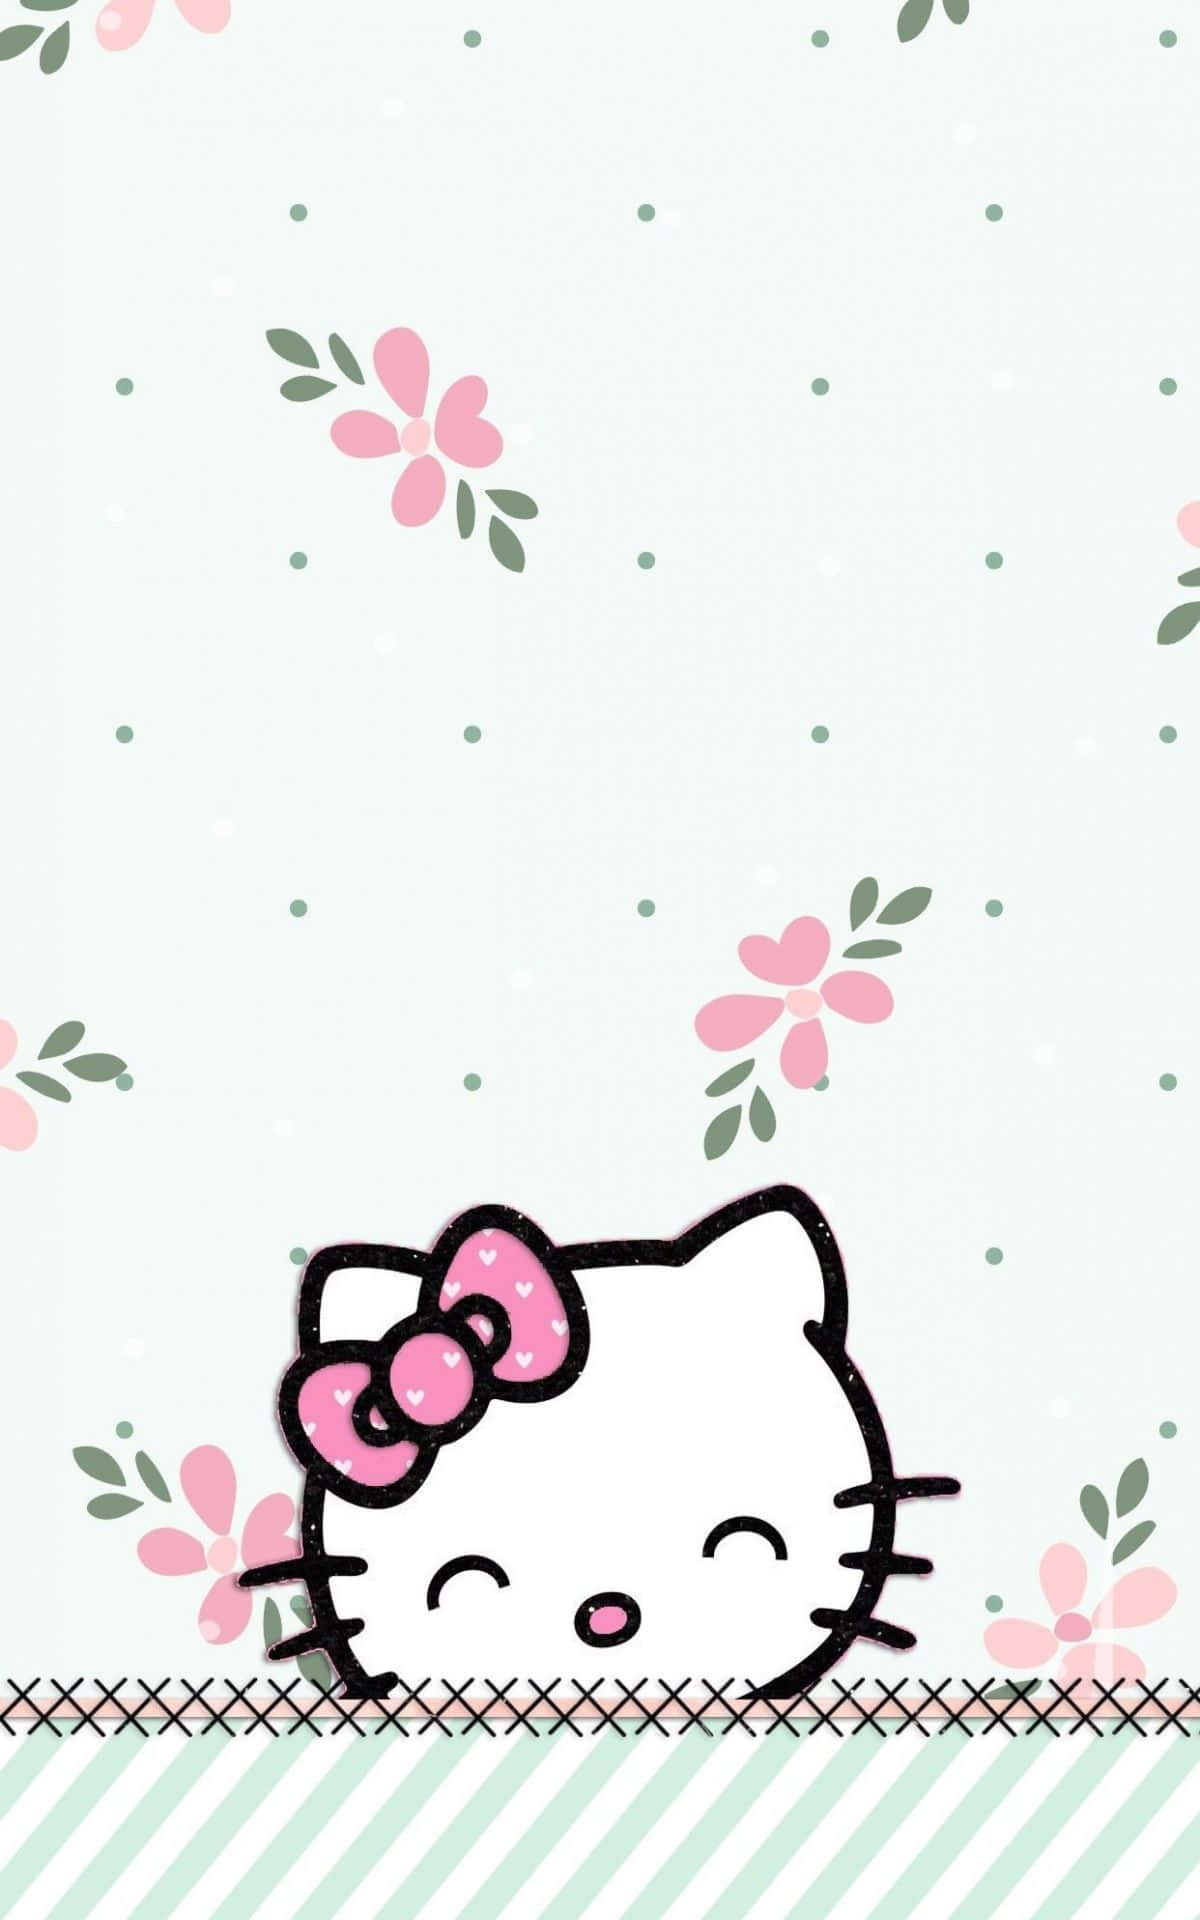 Adorable Sanrio Phone - Make Every Text Message Special! Wallpaper